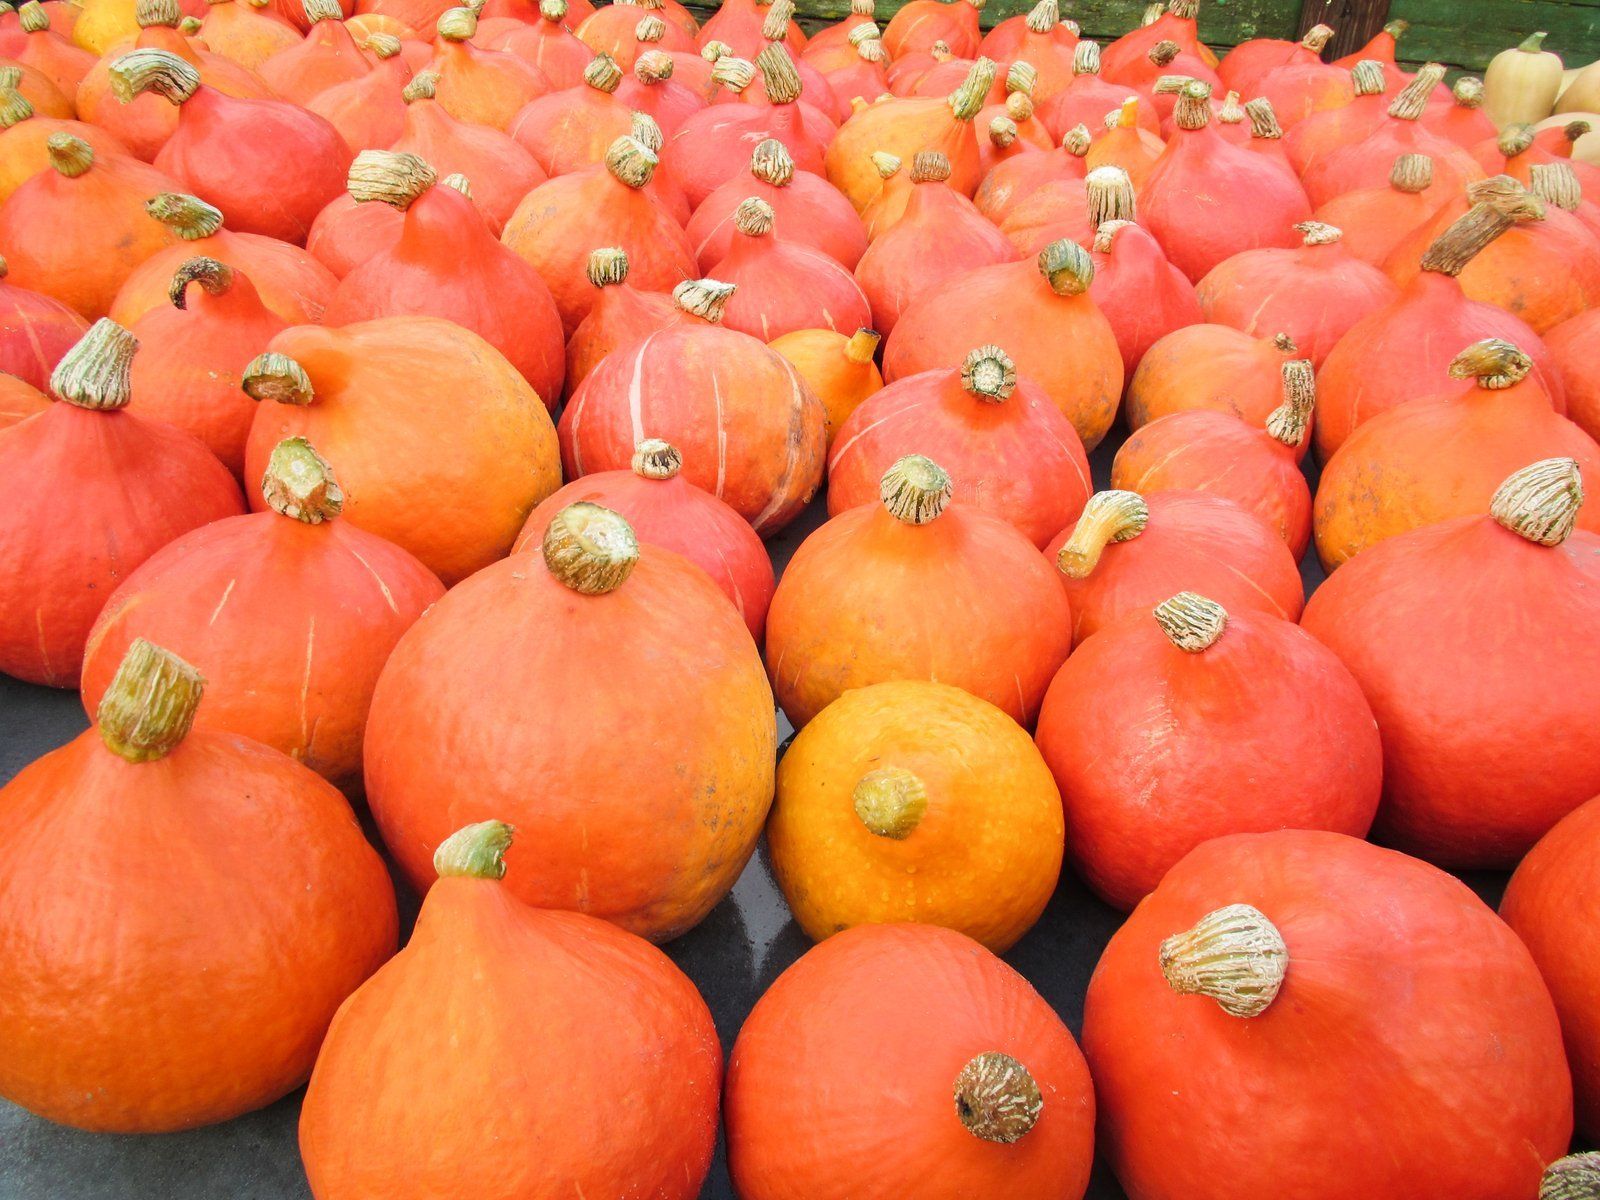 Next Happening: Red Kuri Winter Squash and Ribeye Steaks Available The Week!